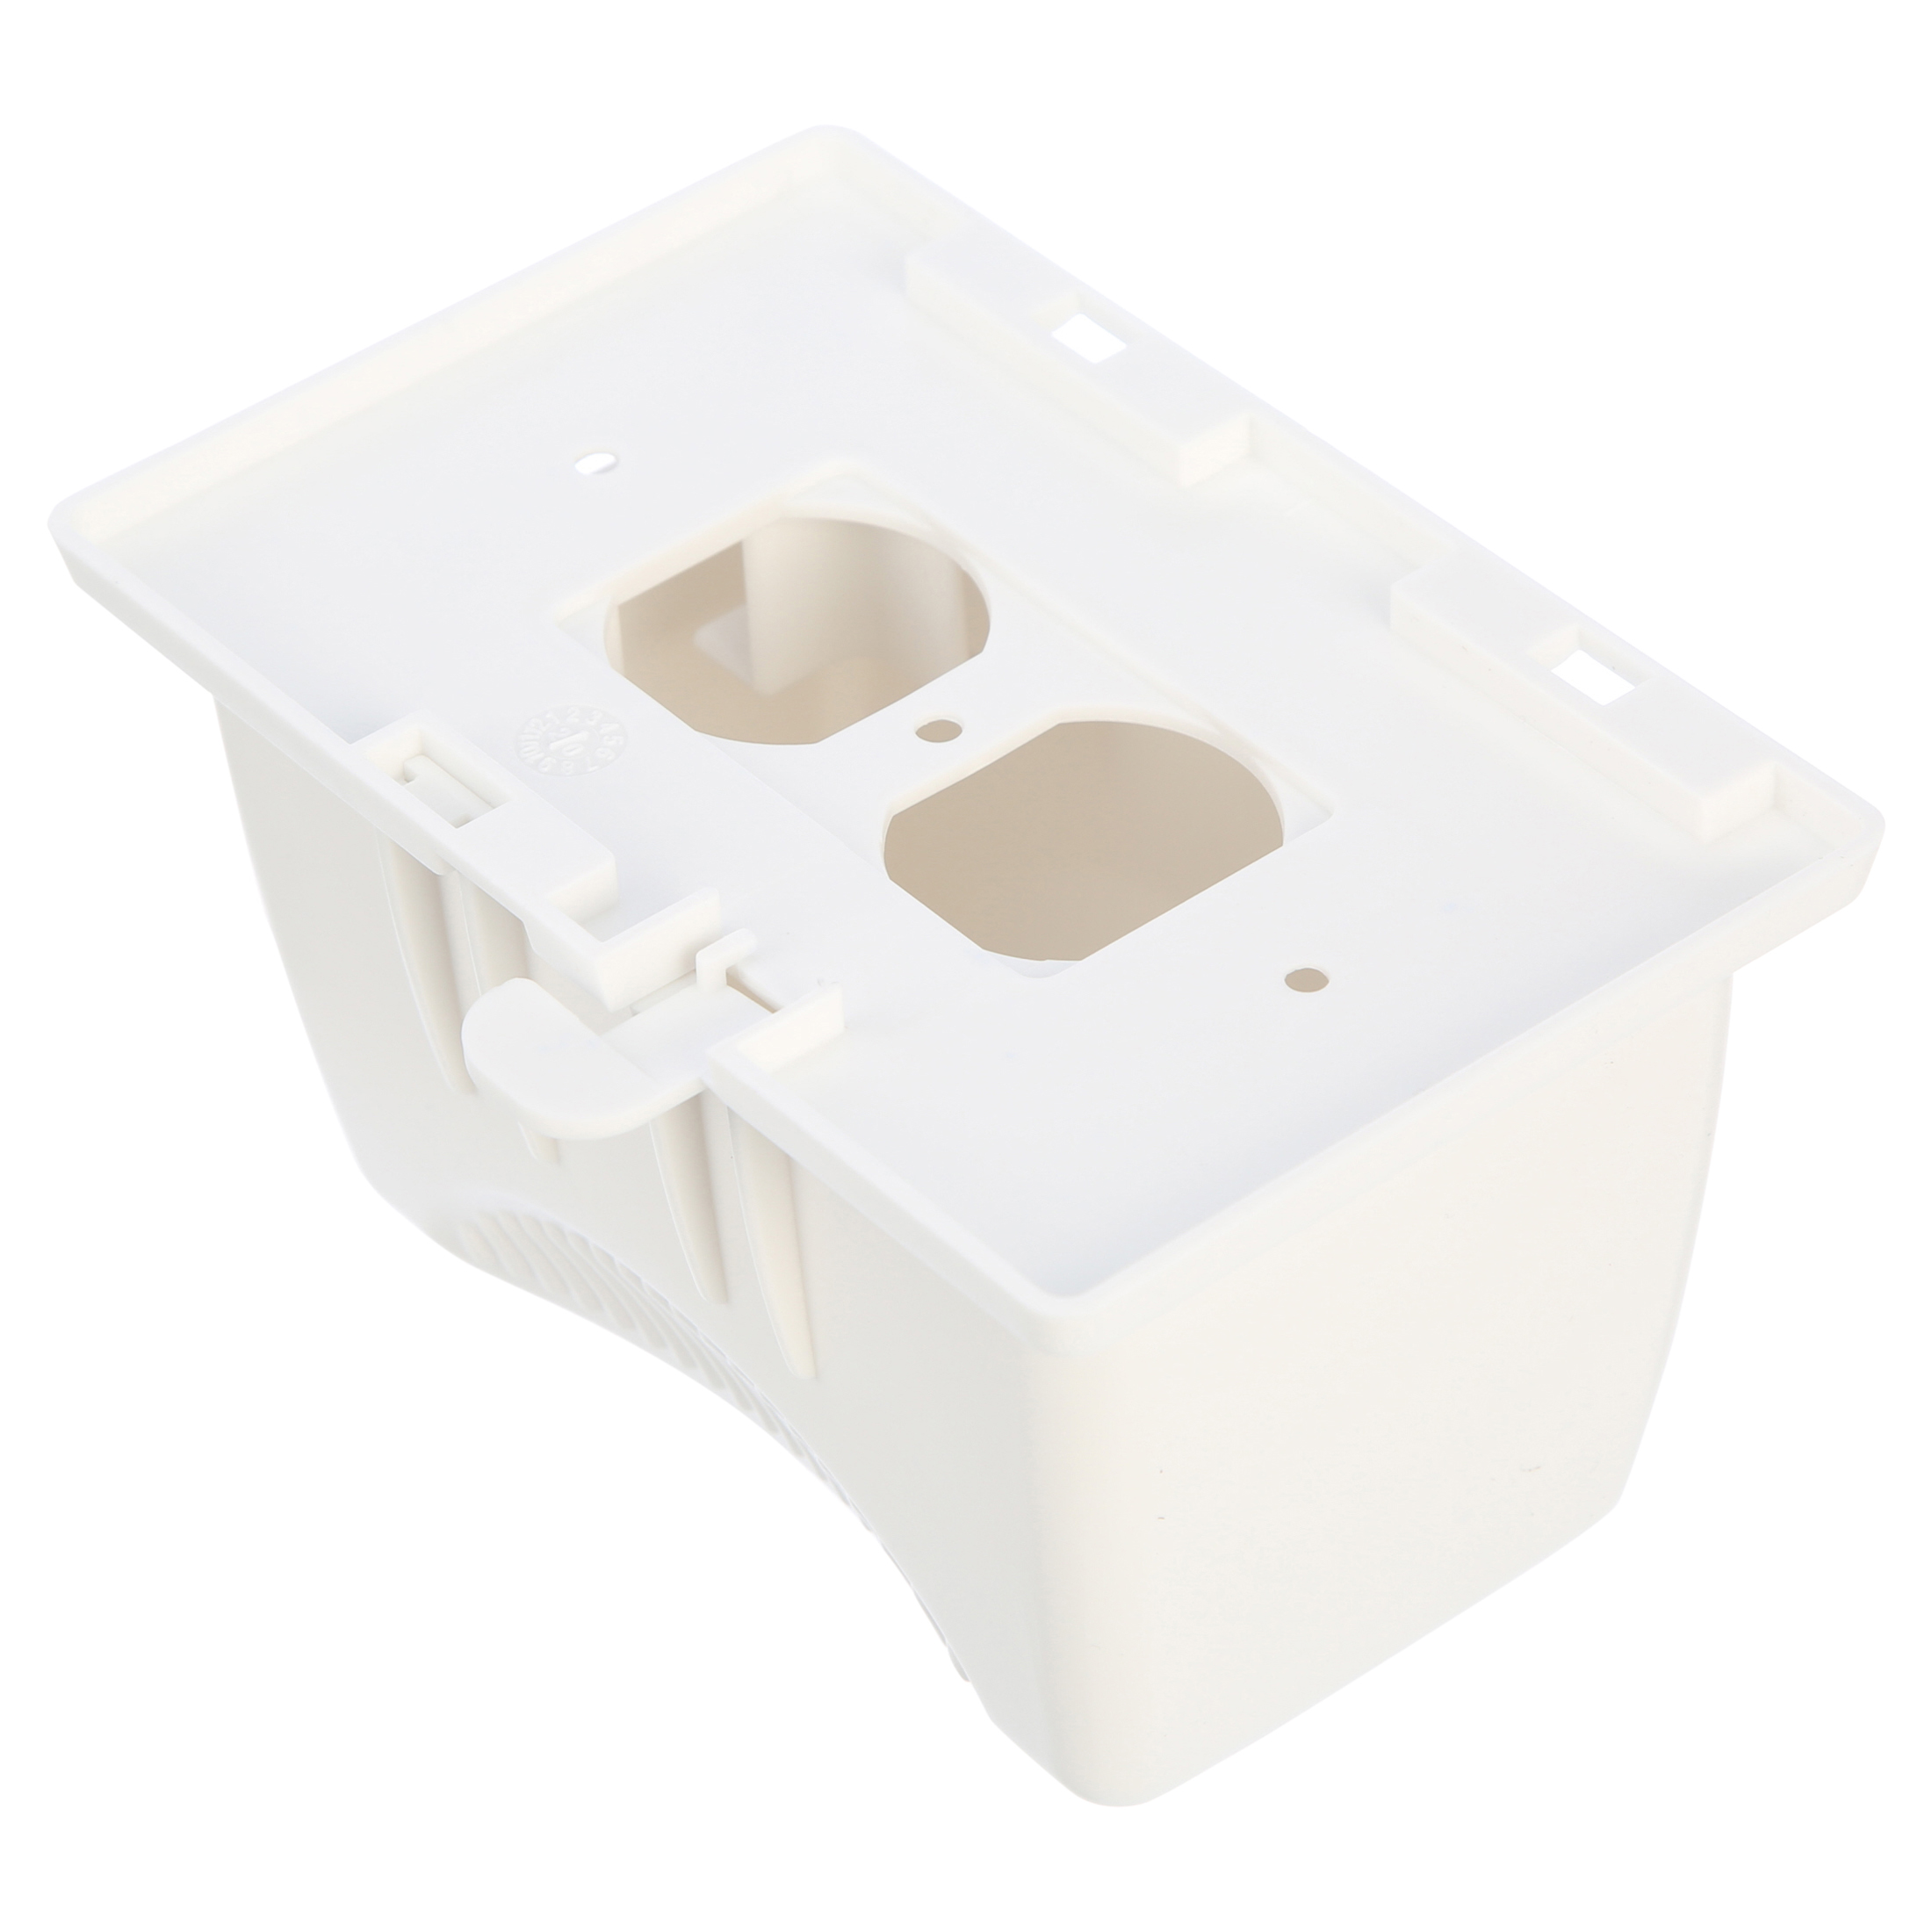 KidCo Child Safety Outlet Plug Cover, White, Plastic - image 4 of 7